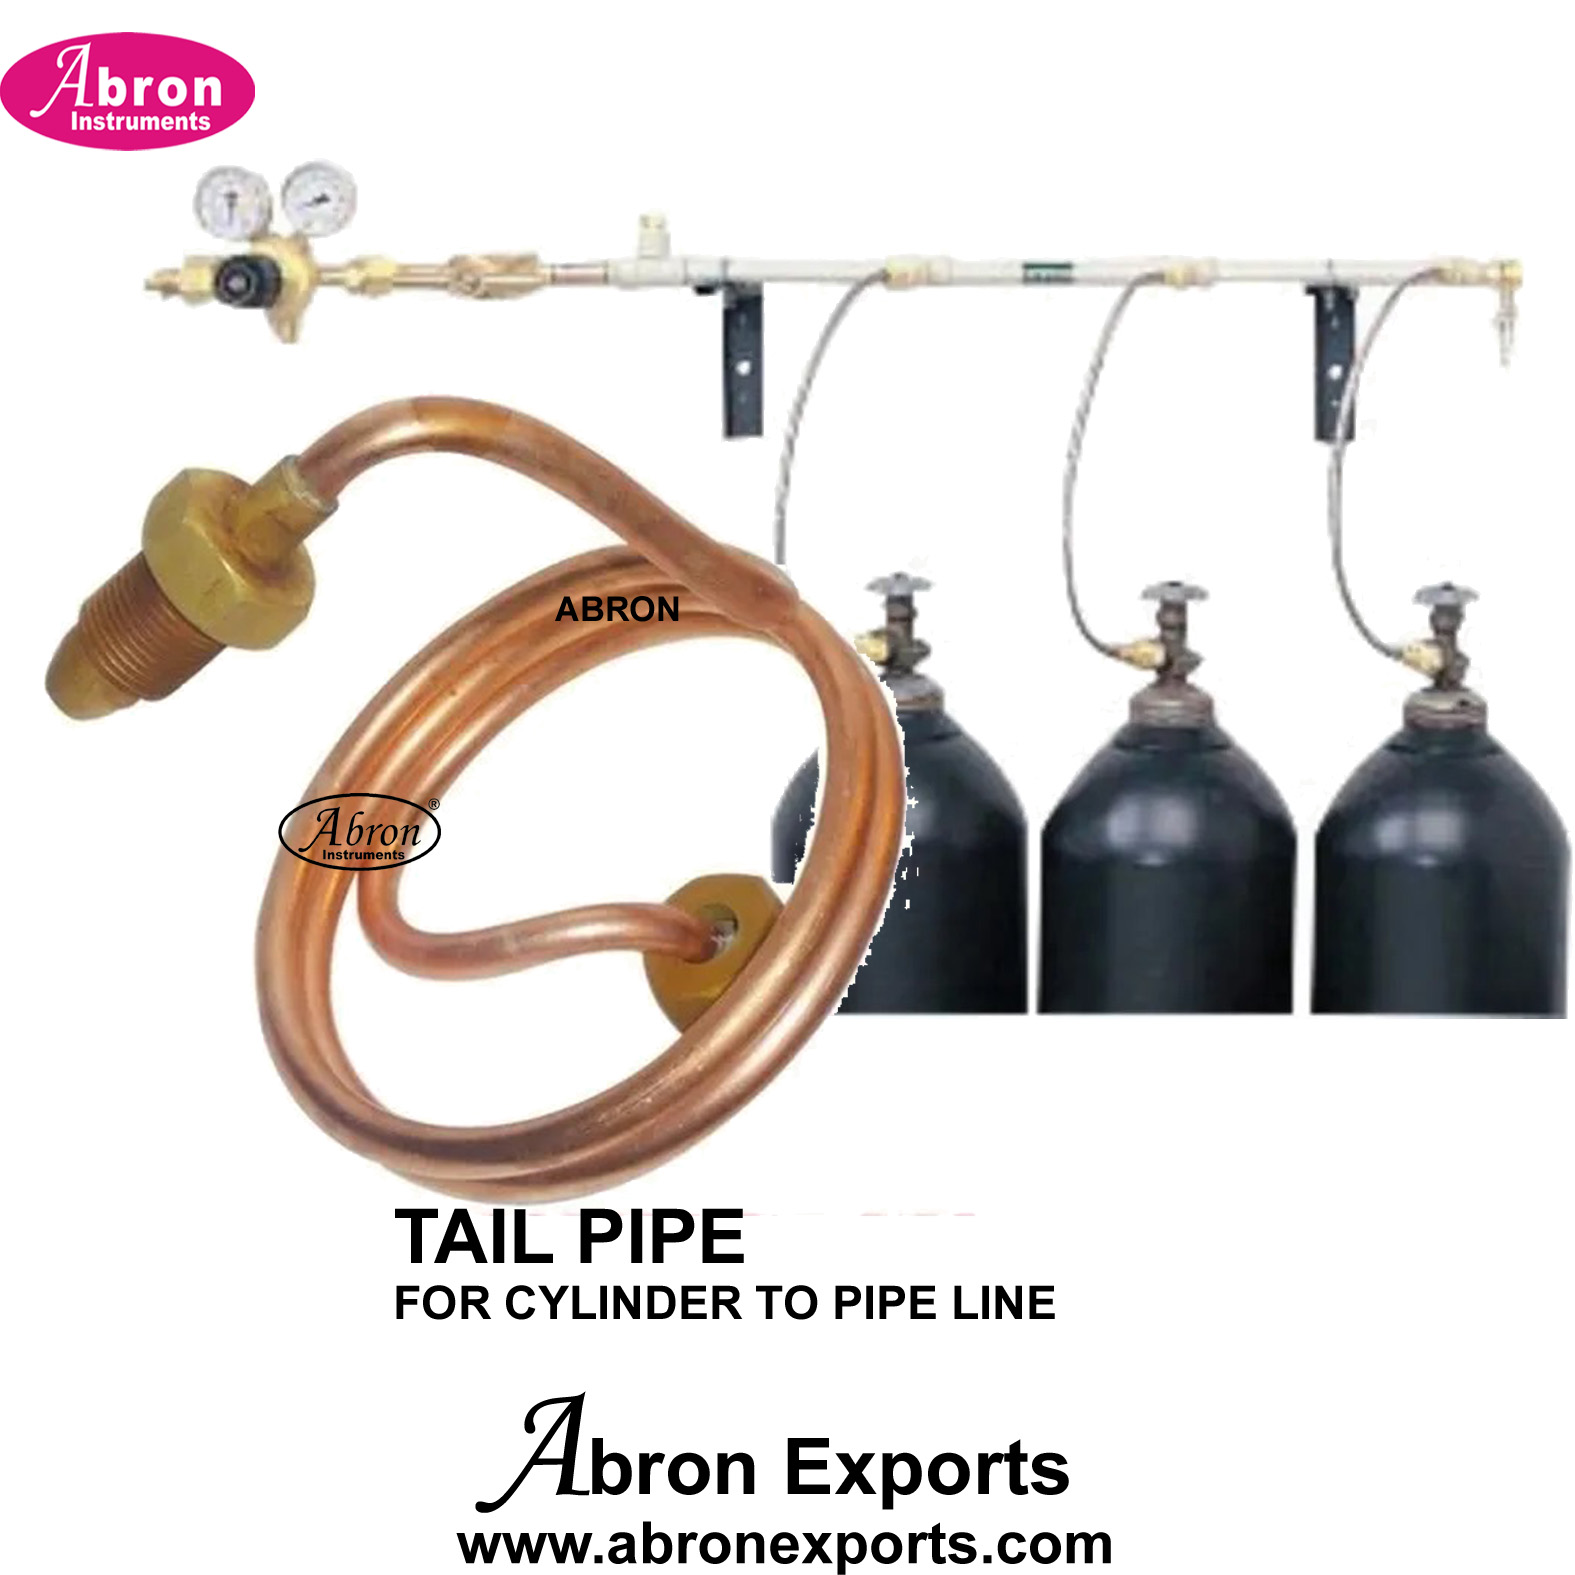 Medical gas Pipe Line Tail Pipe with adaptor copper brass pipe cylinder gas for pipeline installation 10 pc Abron